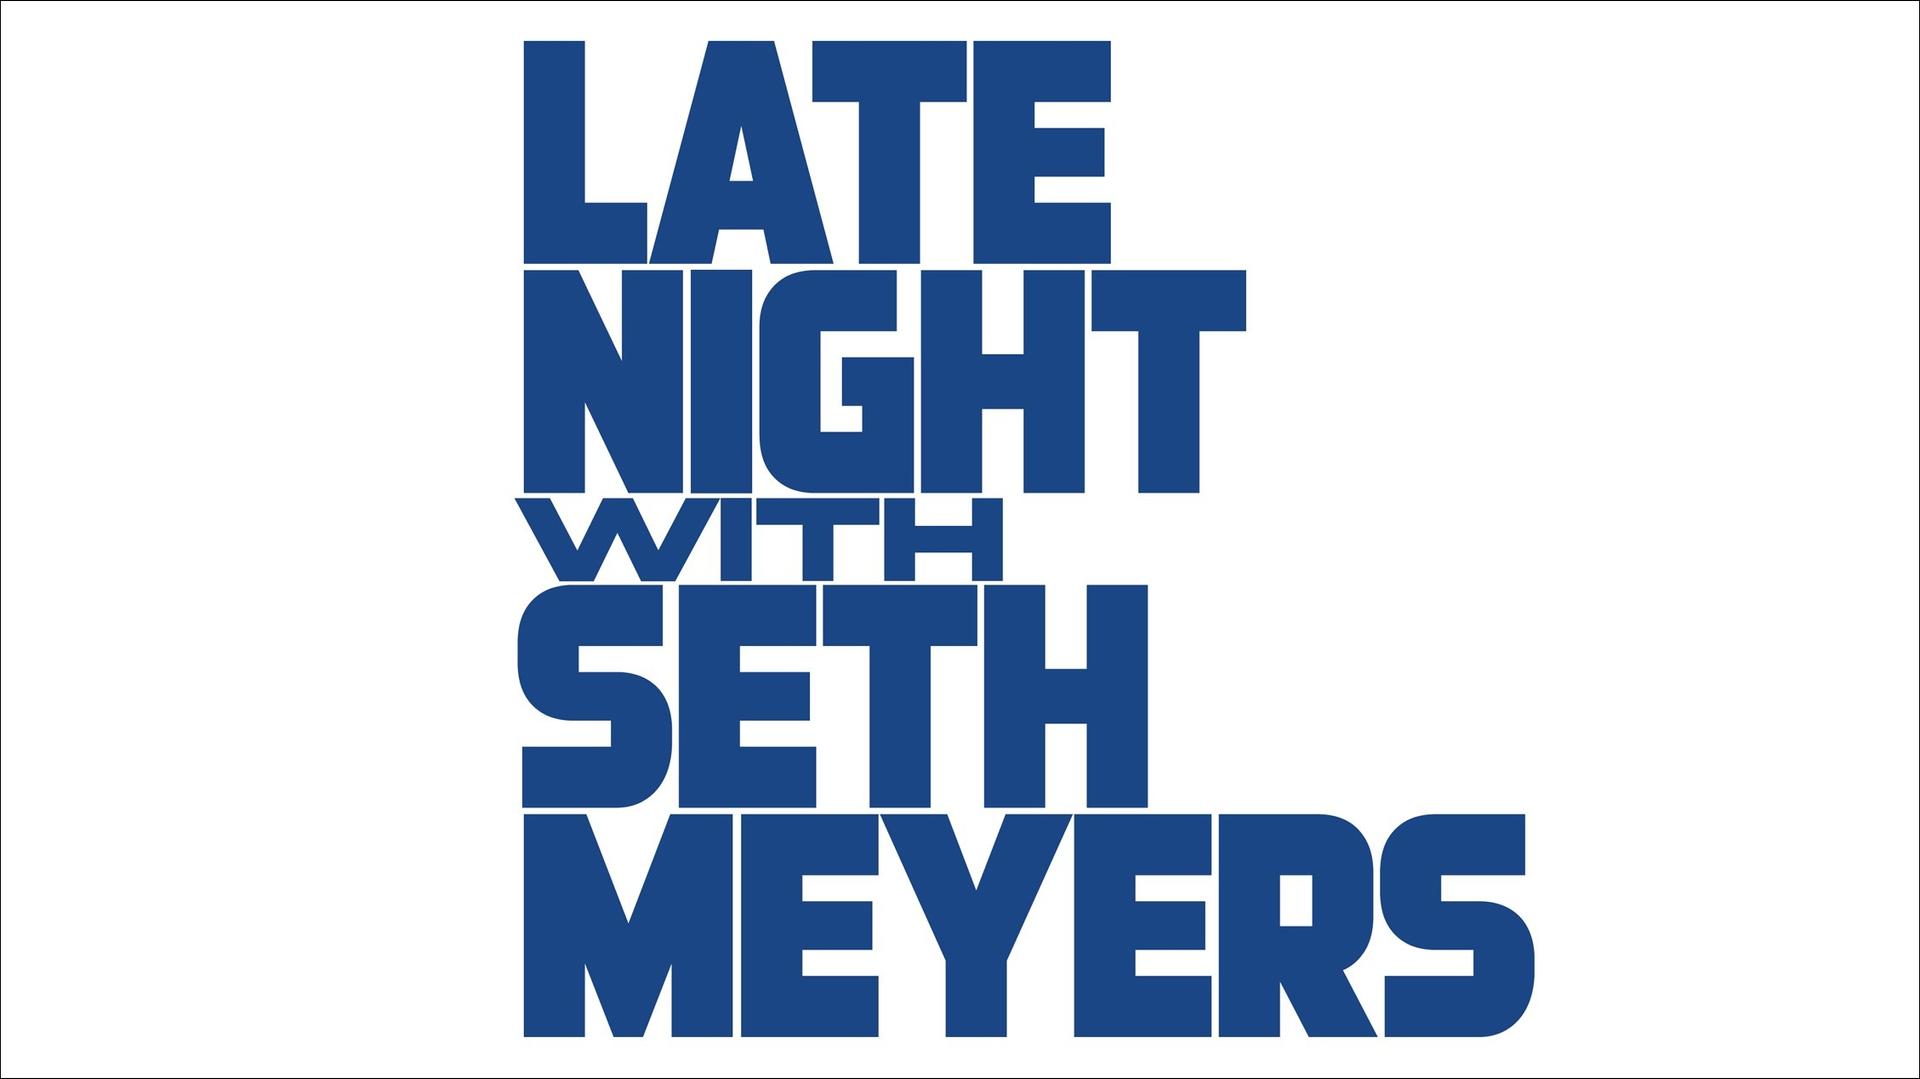 One possible logo design for “Late Night with Seth Meyers,” inspired by the “CBS Evening News.”